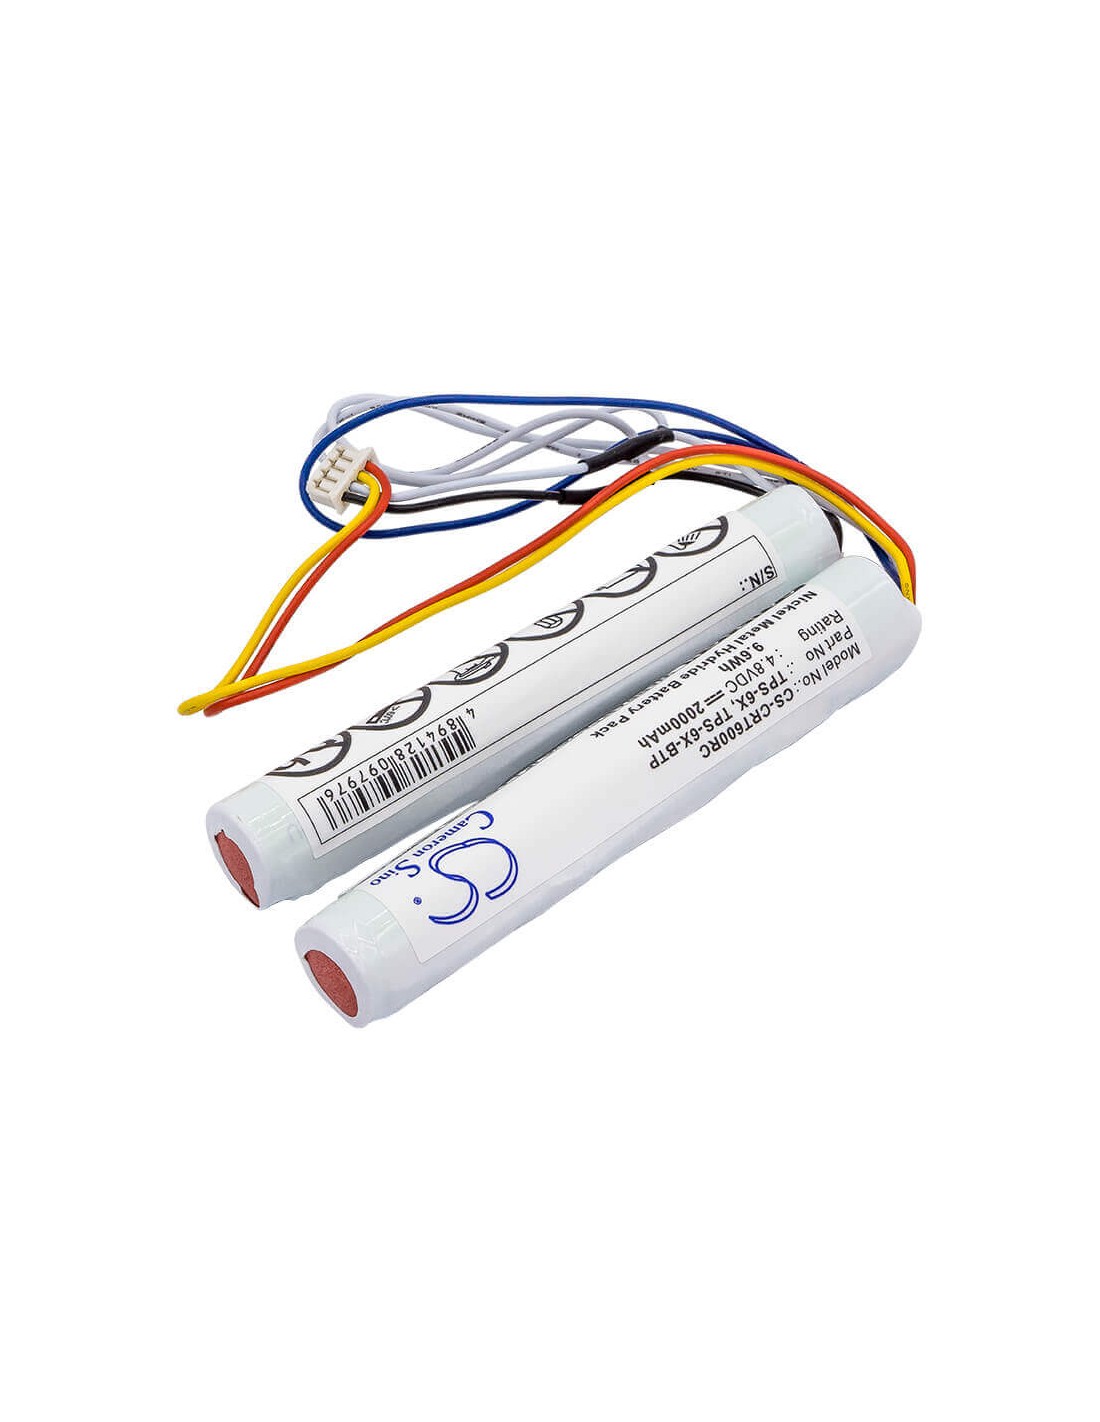 Battery for Crestron Tps-6x Wireless Touchpanel 4.8V, 2000mAh - 9.60Wh